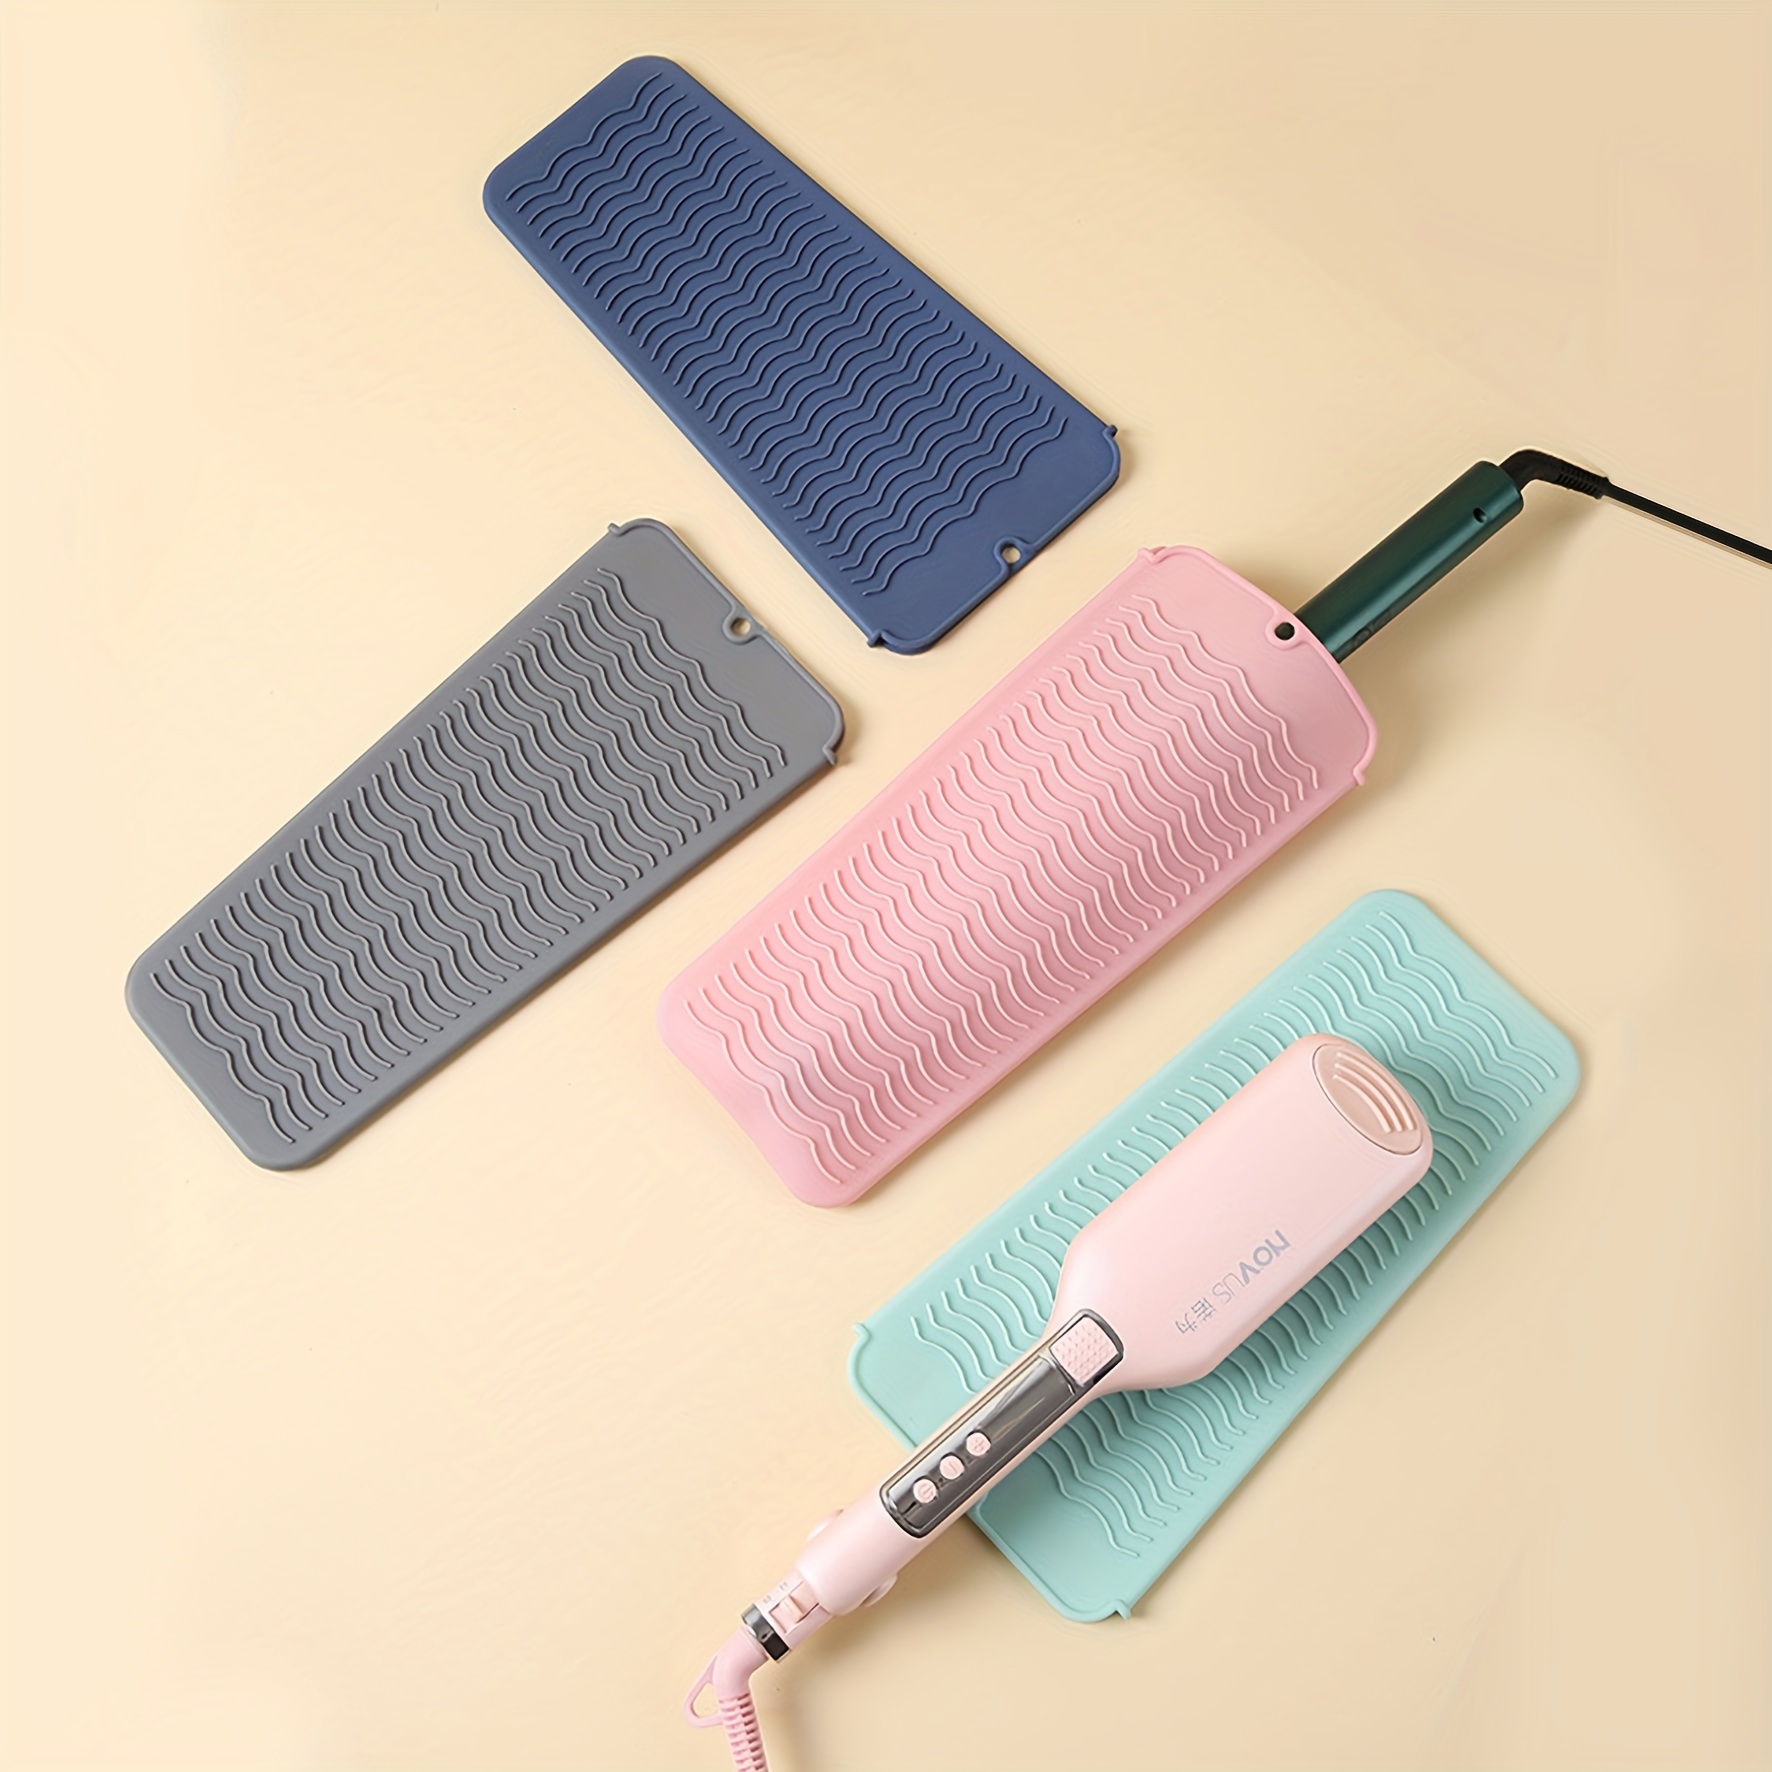 Professional Large Silicone Heat Resistant Styling Station Mat - Curling  Iron Holder - Straightener Pad - Flat Iron Holder - Hot Tool Mat - Salon